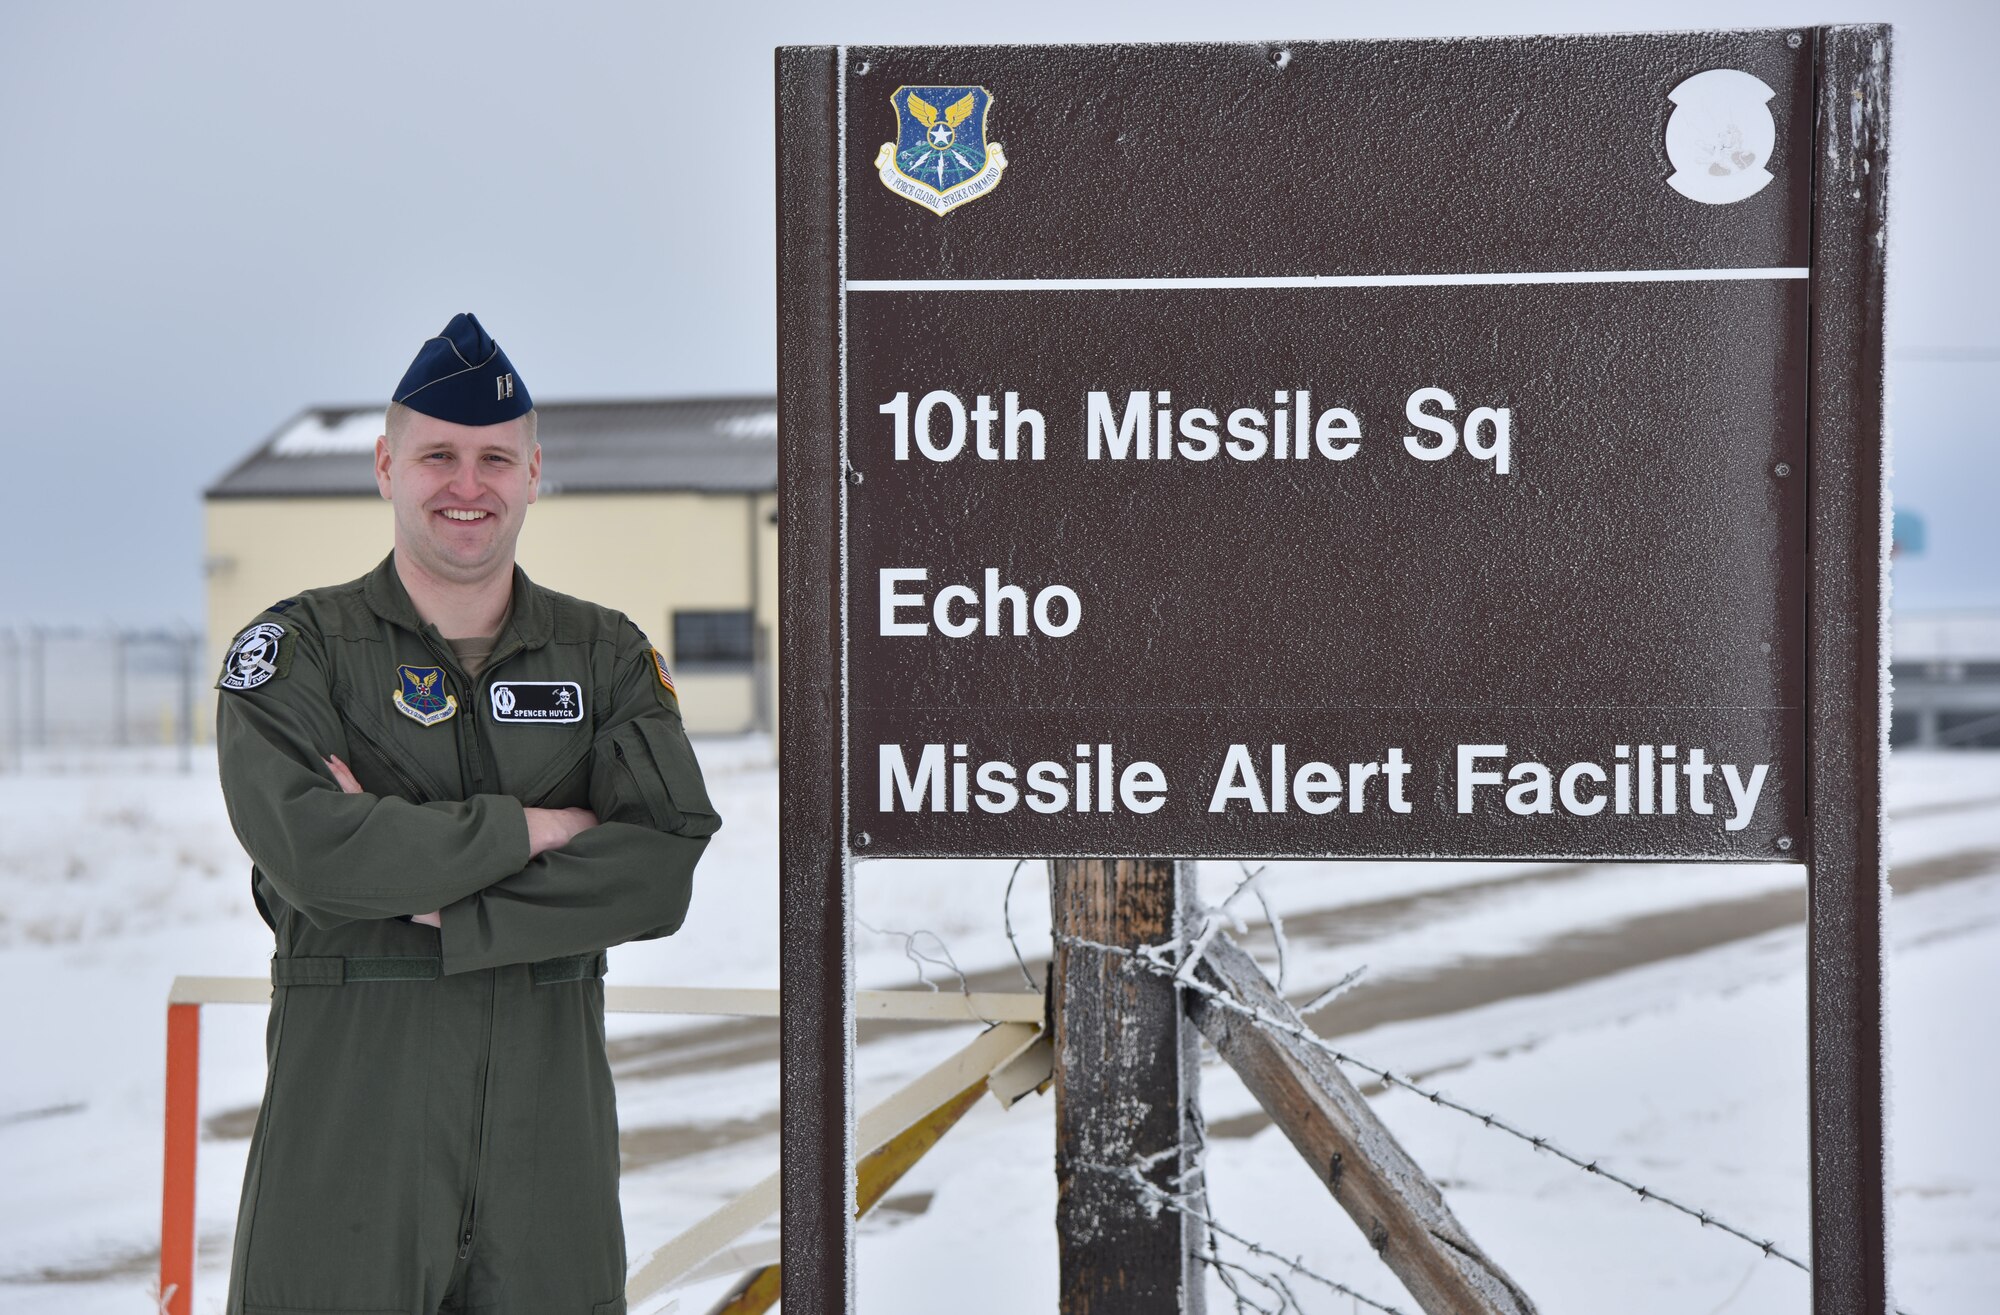 Capt. Spencer Huyck, 10th Missile Squadron mission combat crew commander, stands outside a Missile Alert Facility, Dec. 11, 2019, near Malmstrom Air Force Base, Mont